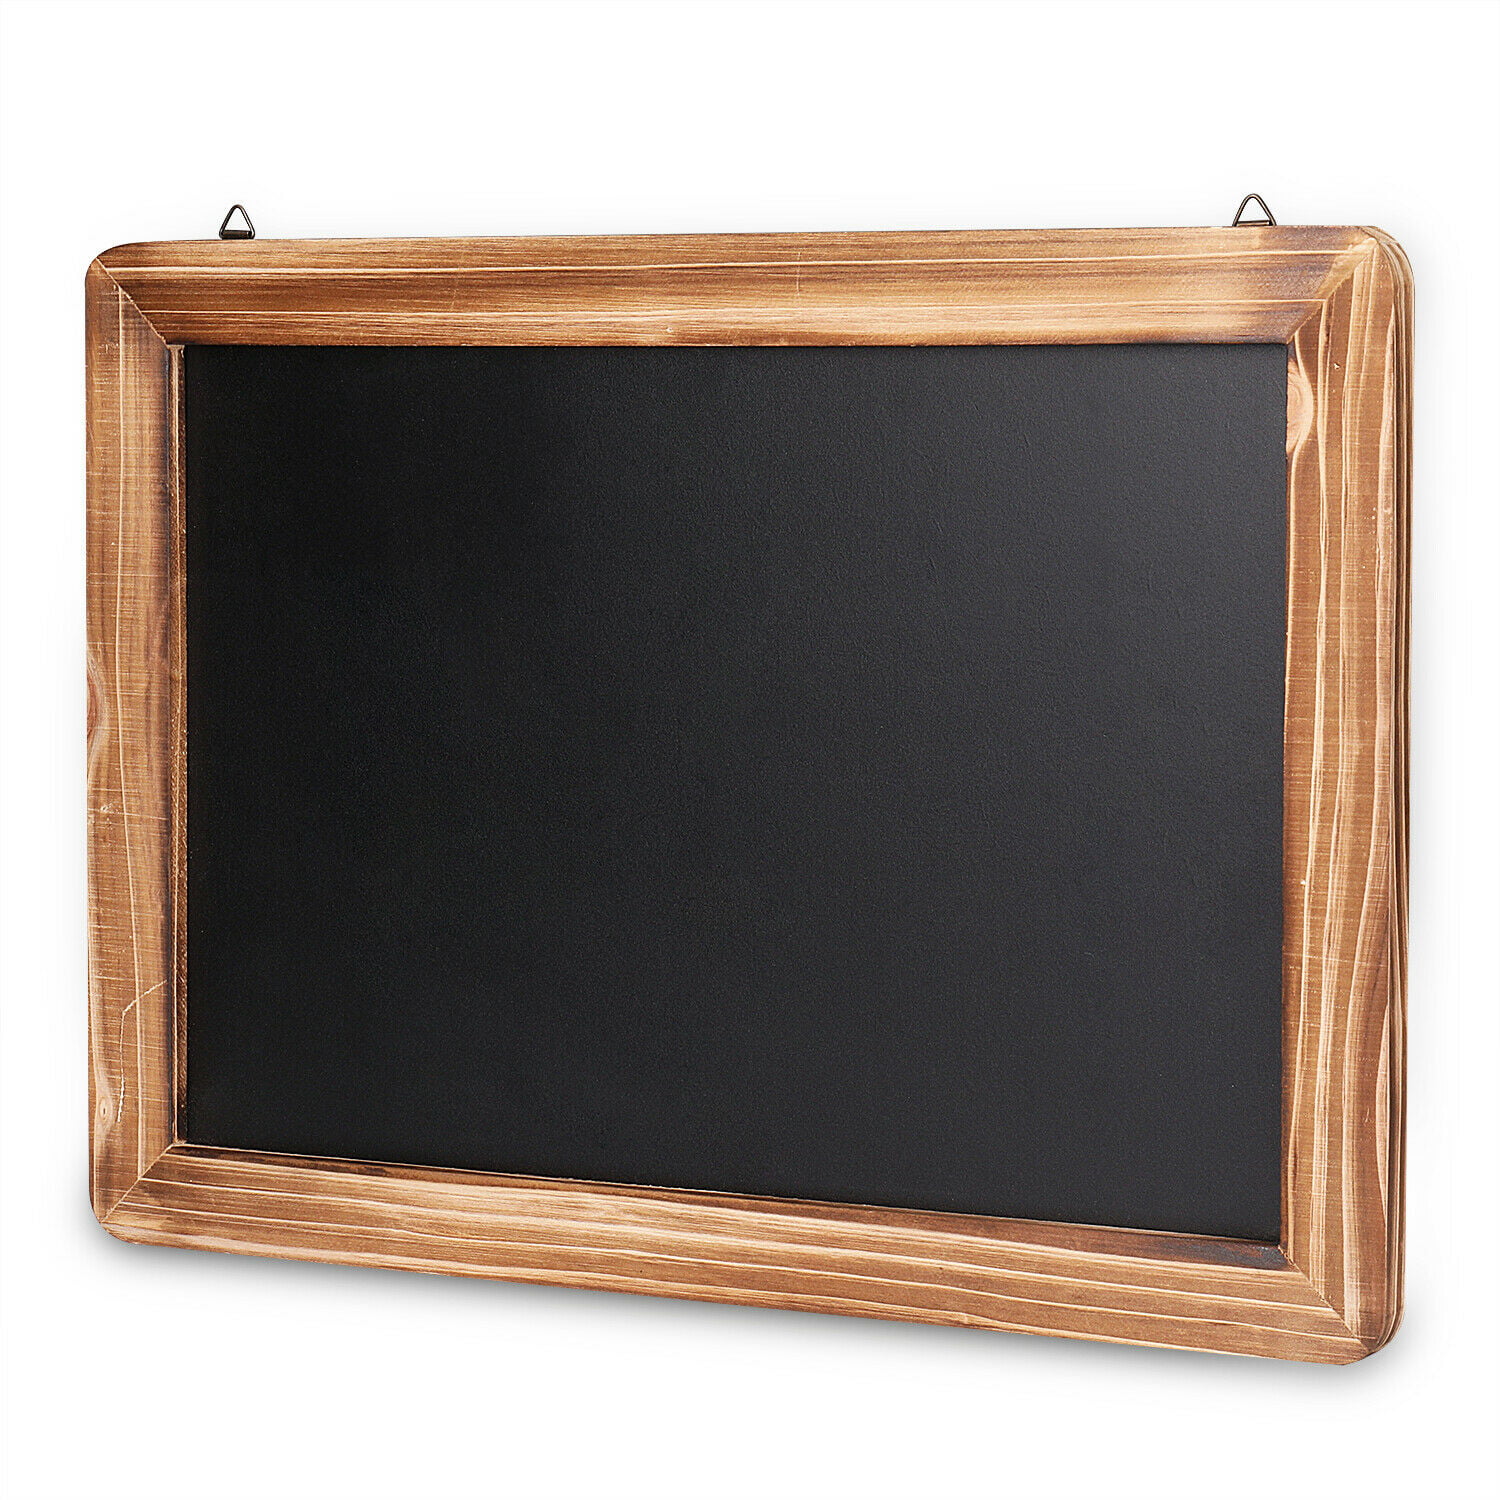 Vintage Wall Mounted Brown Wood Framed Chalkboard Sign 36 x 24 Inch 